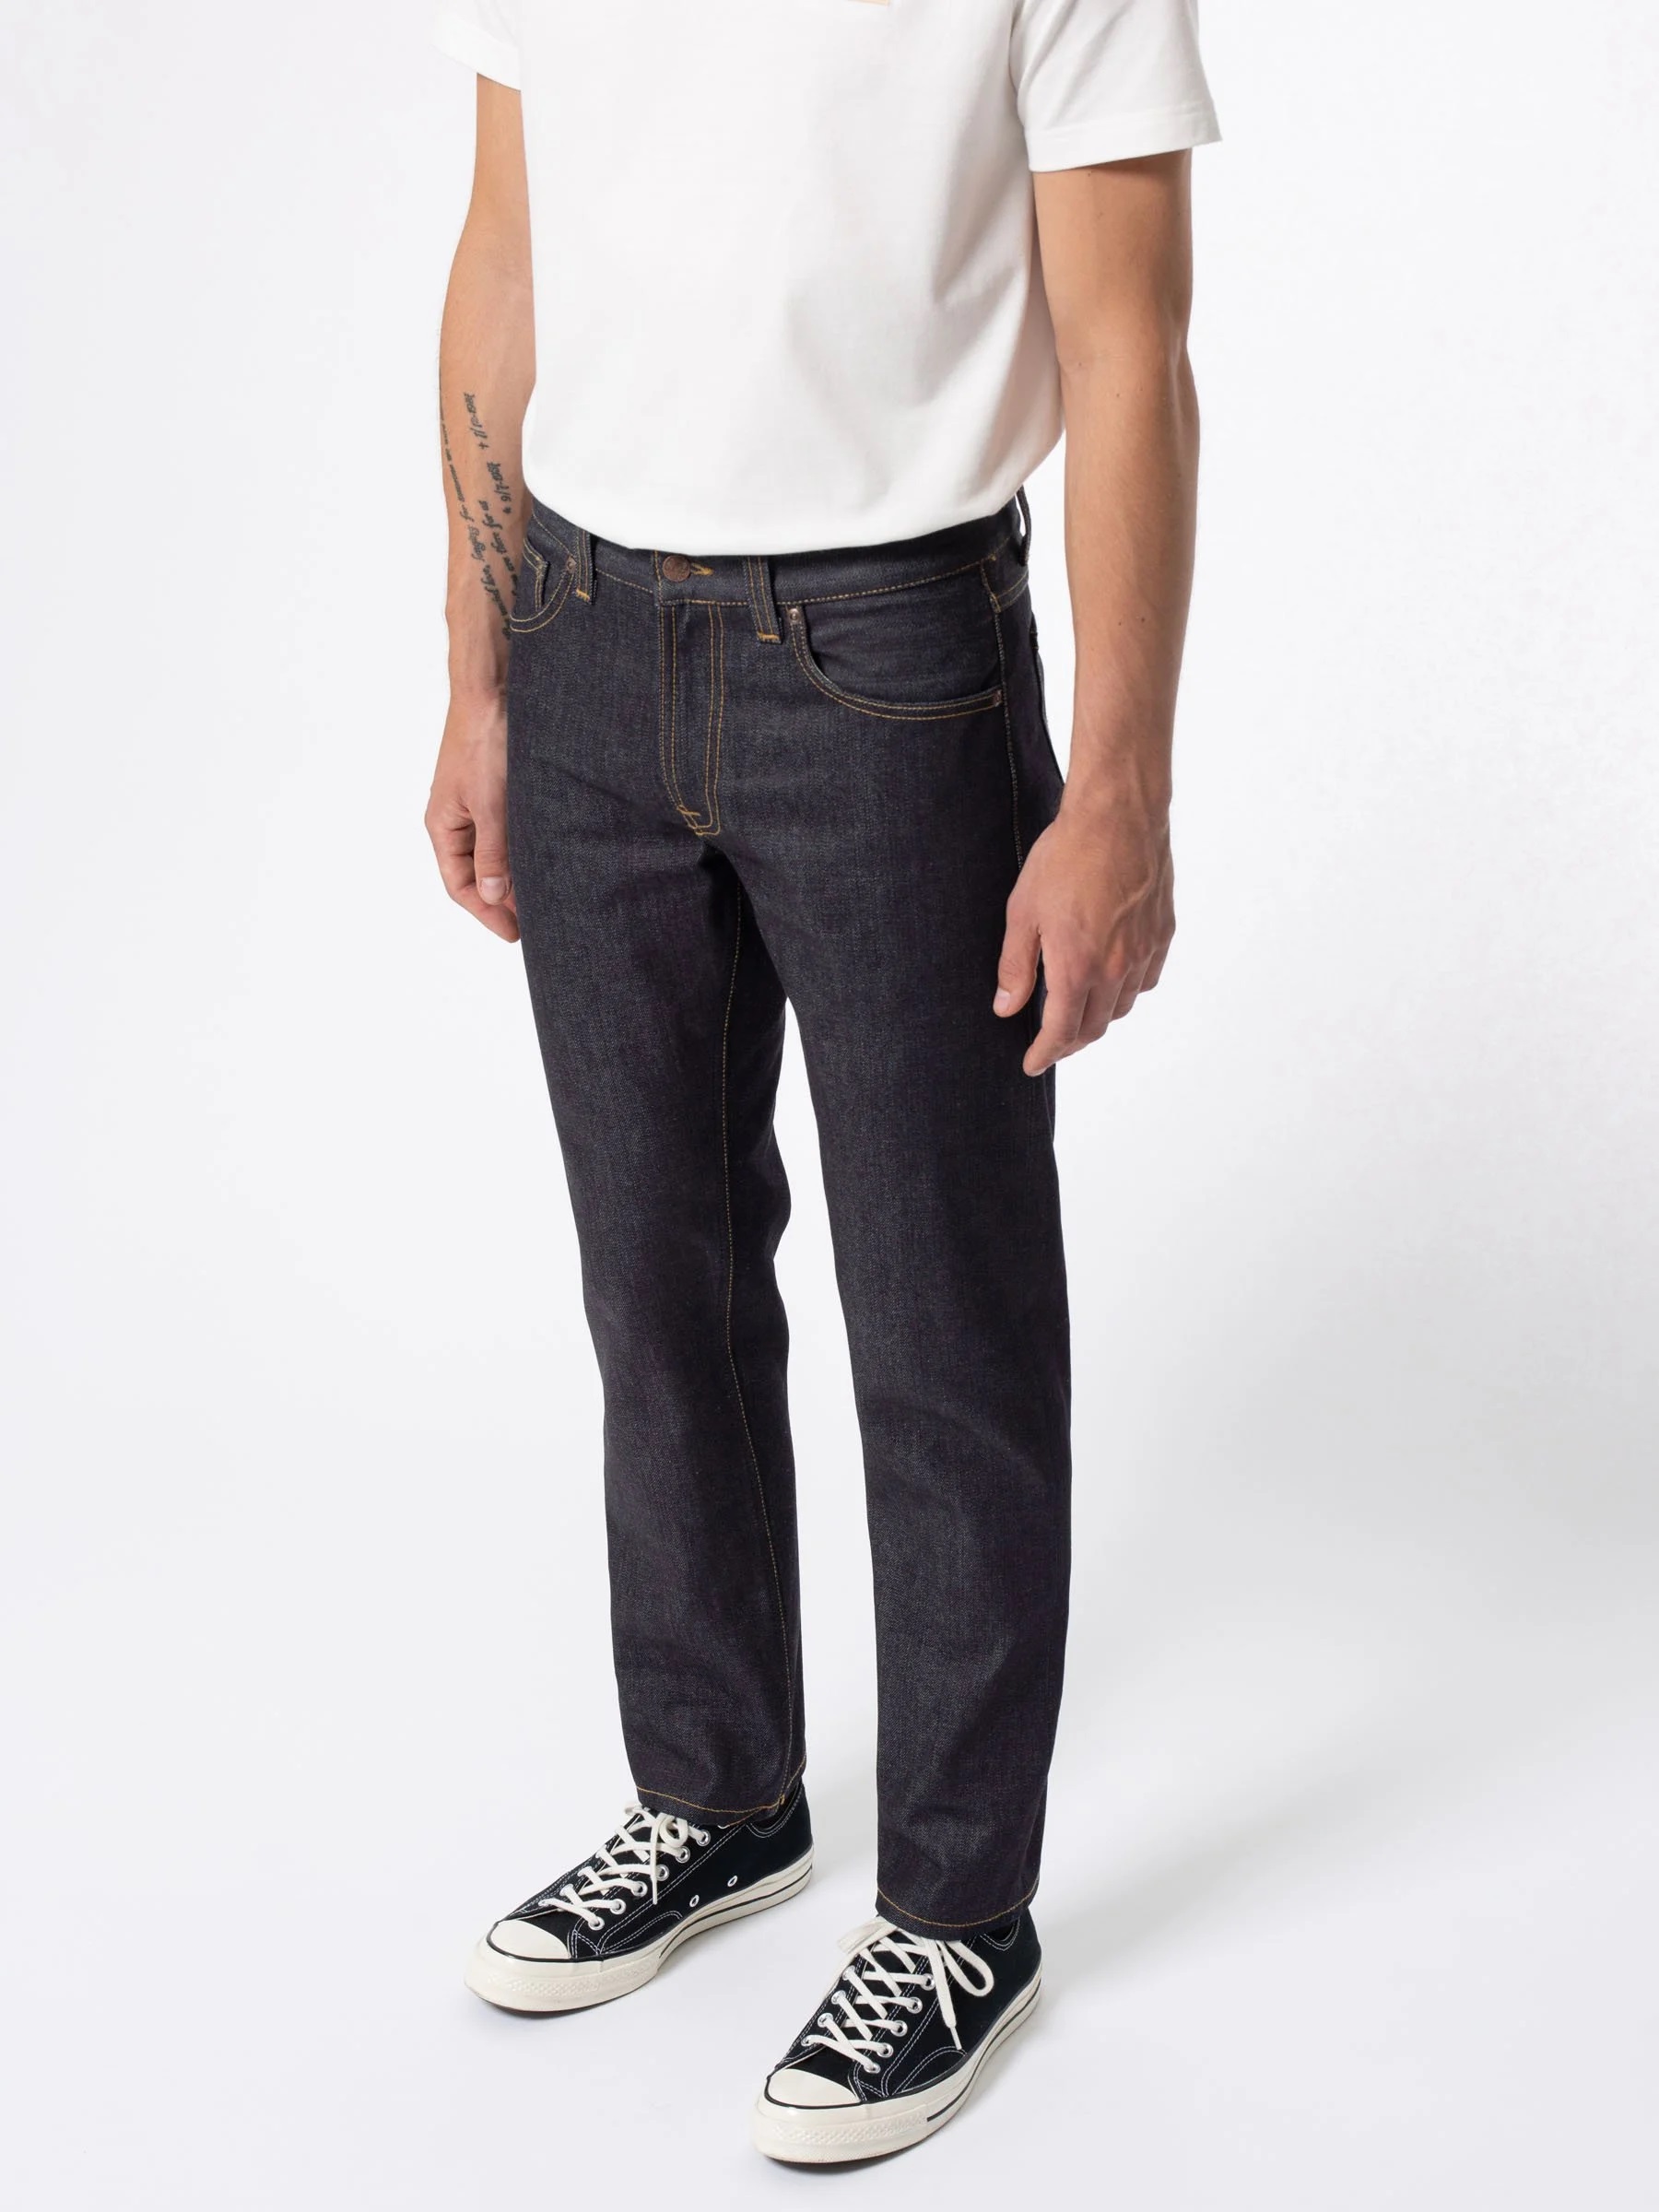 Nudie Jeans - GRITTY JACKSON - Dry  Classic Navy